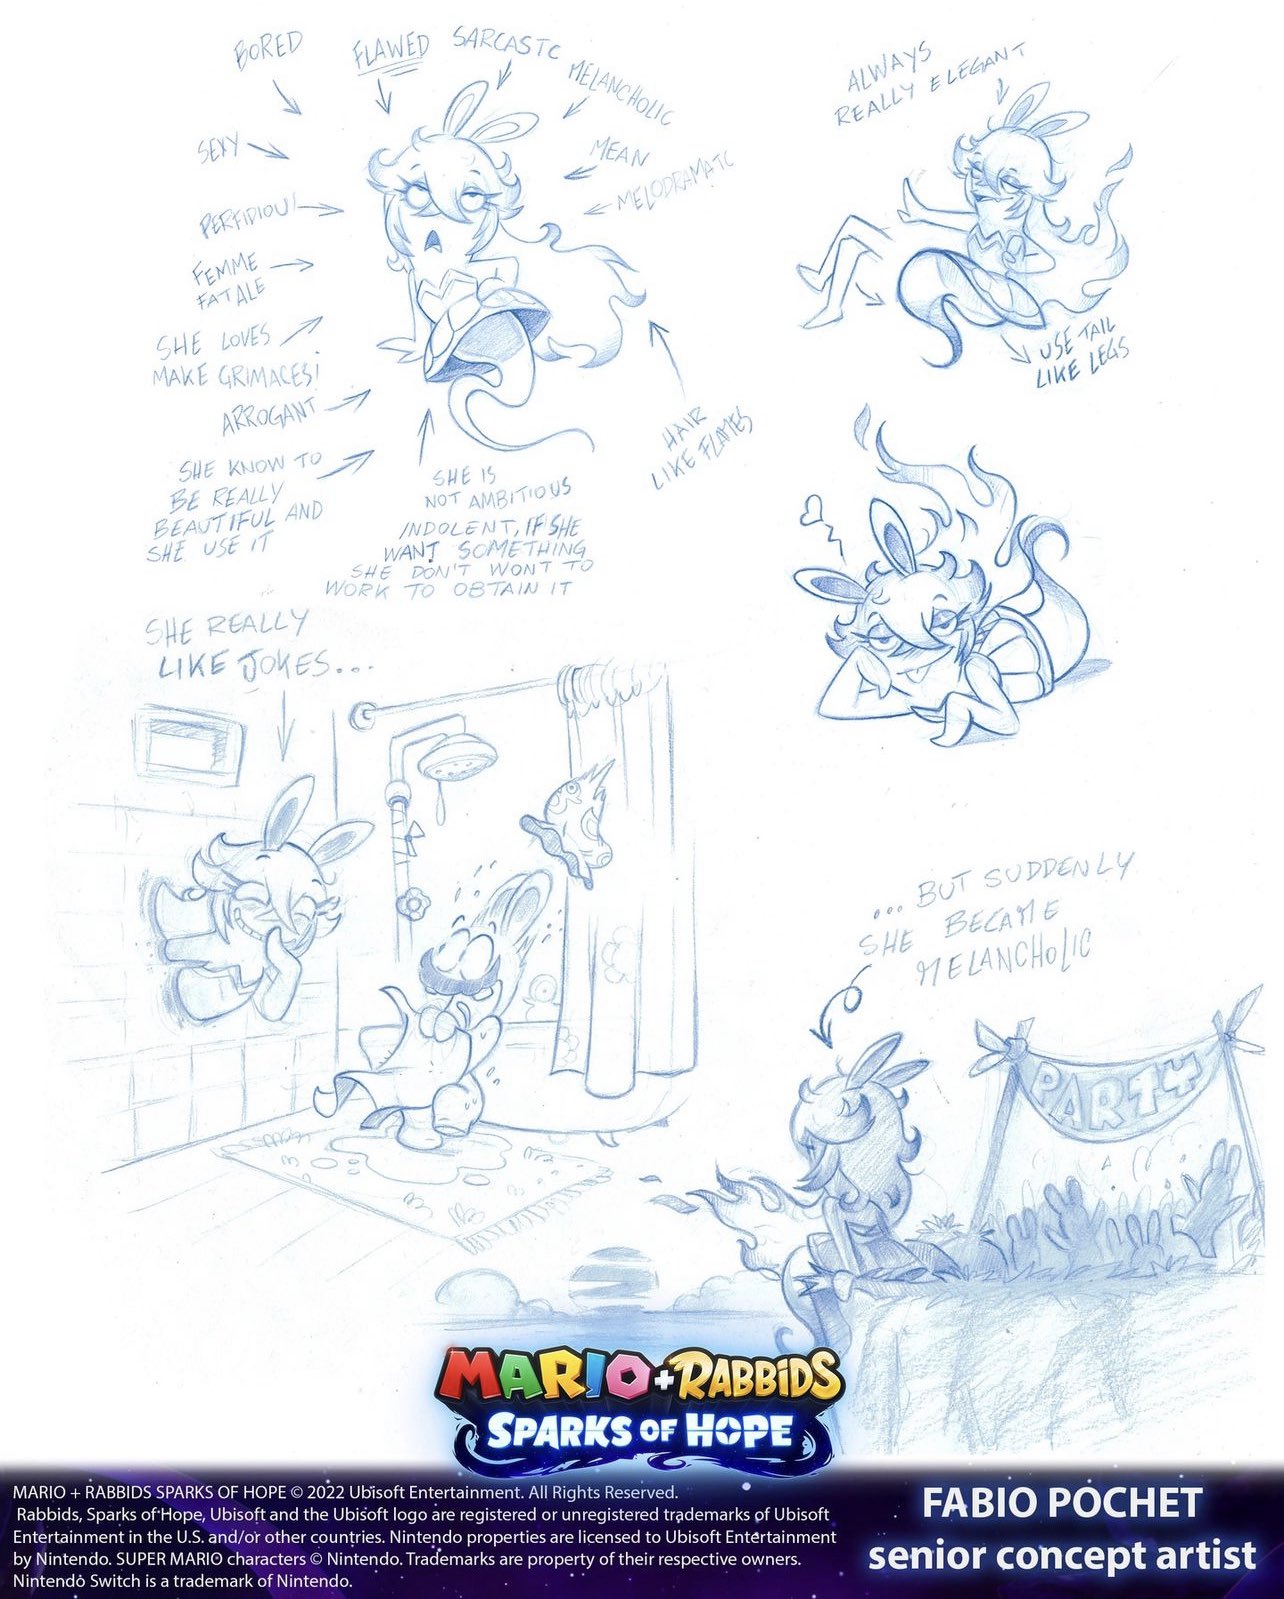 Concept art sketches of Midnite in Mario + Rabbids Sparks of Hope, drawn by Fabio Pochet